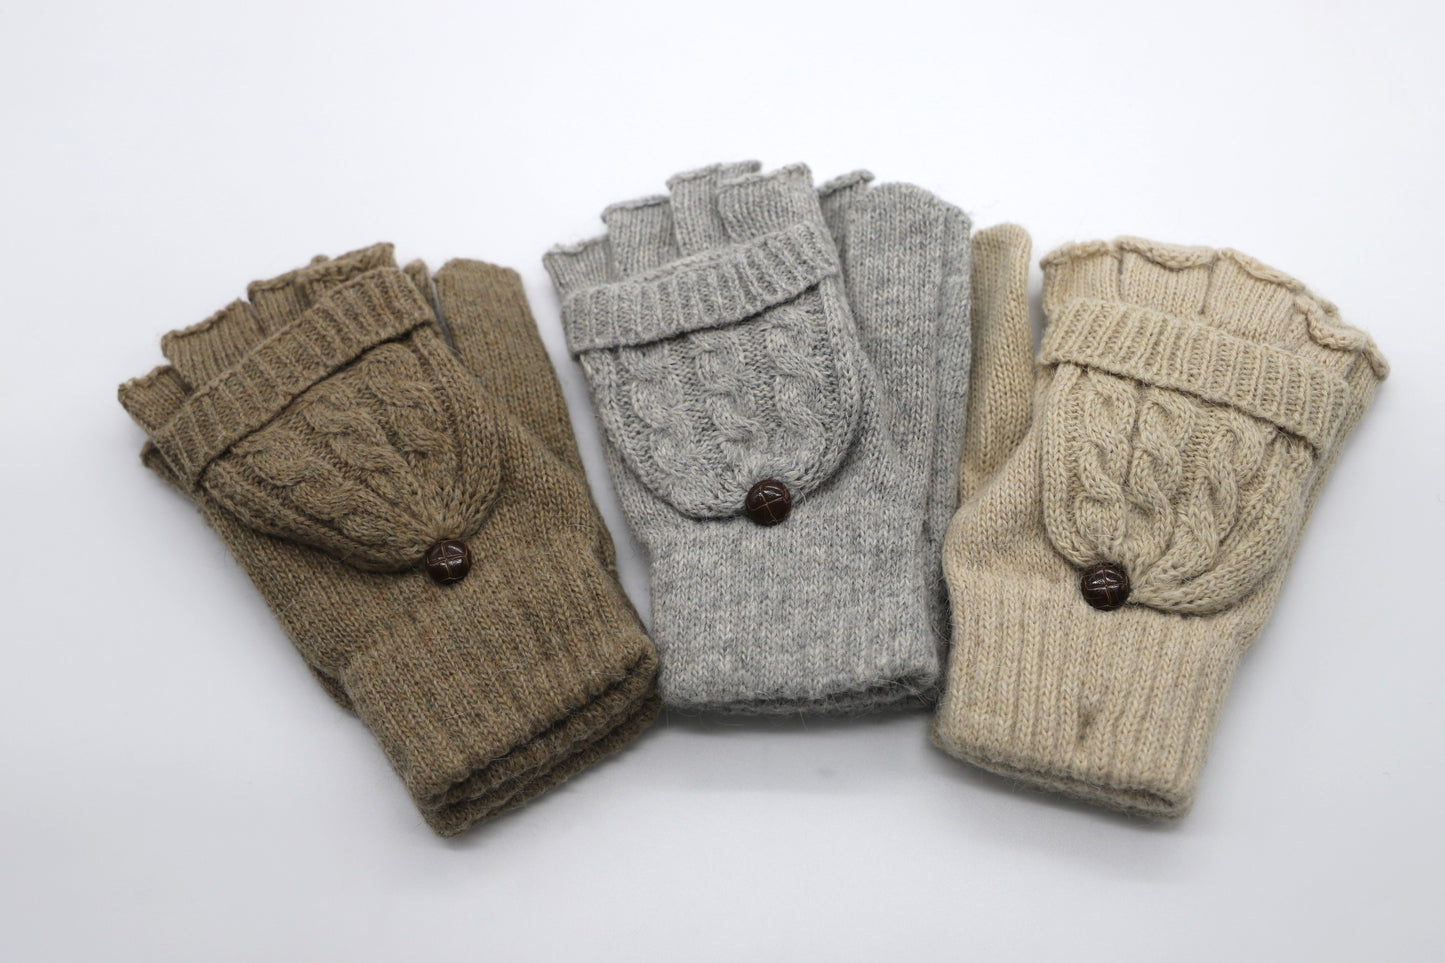 Warm Flip-Top Gloves for Women from Wool Blend - Taupe Brown - Scarf Designers